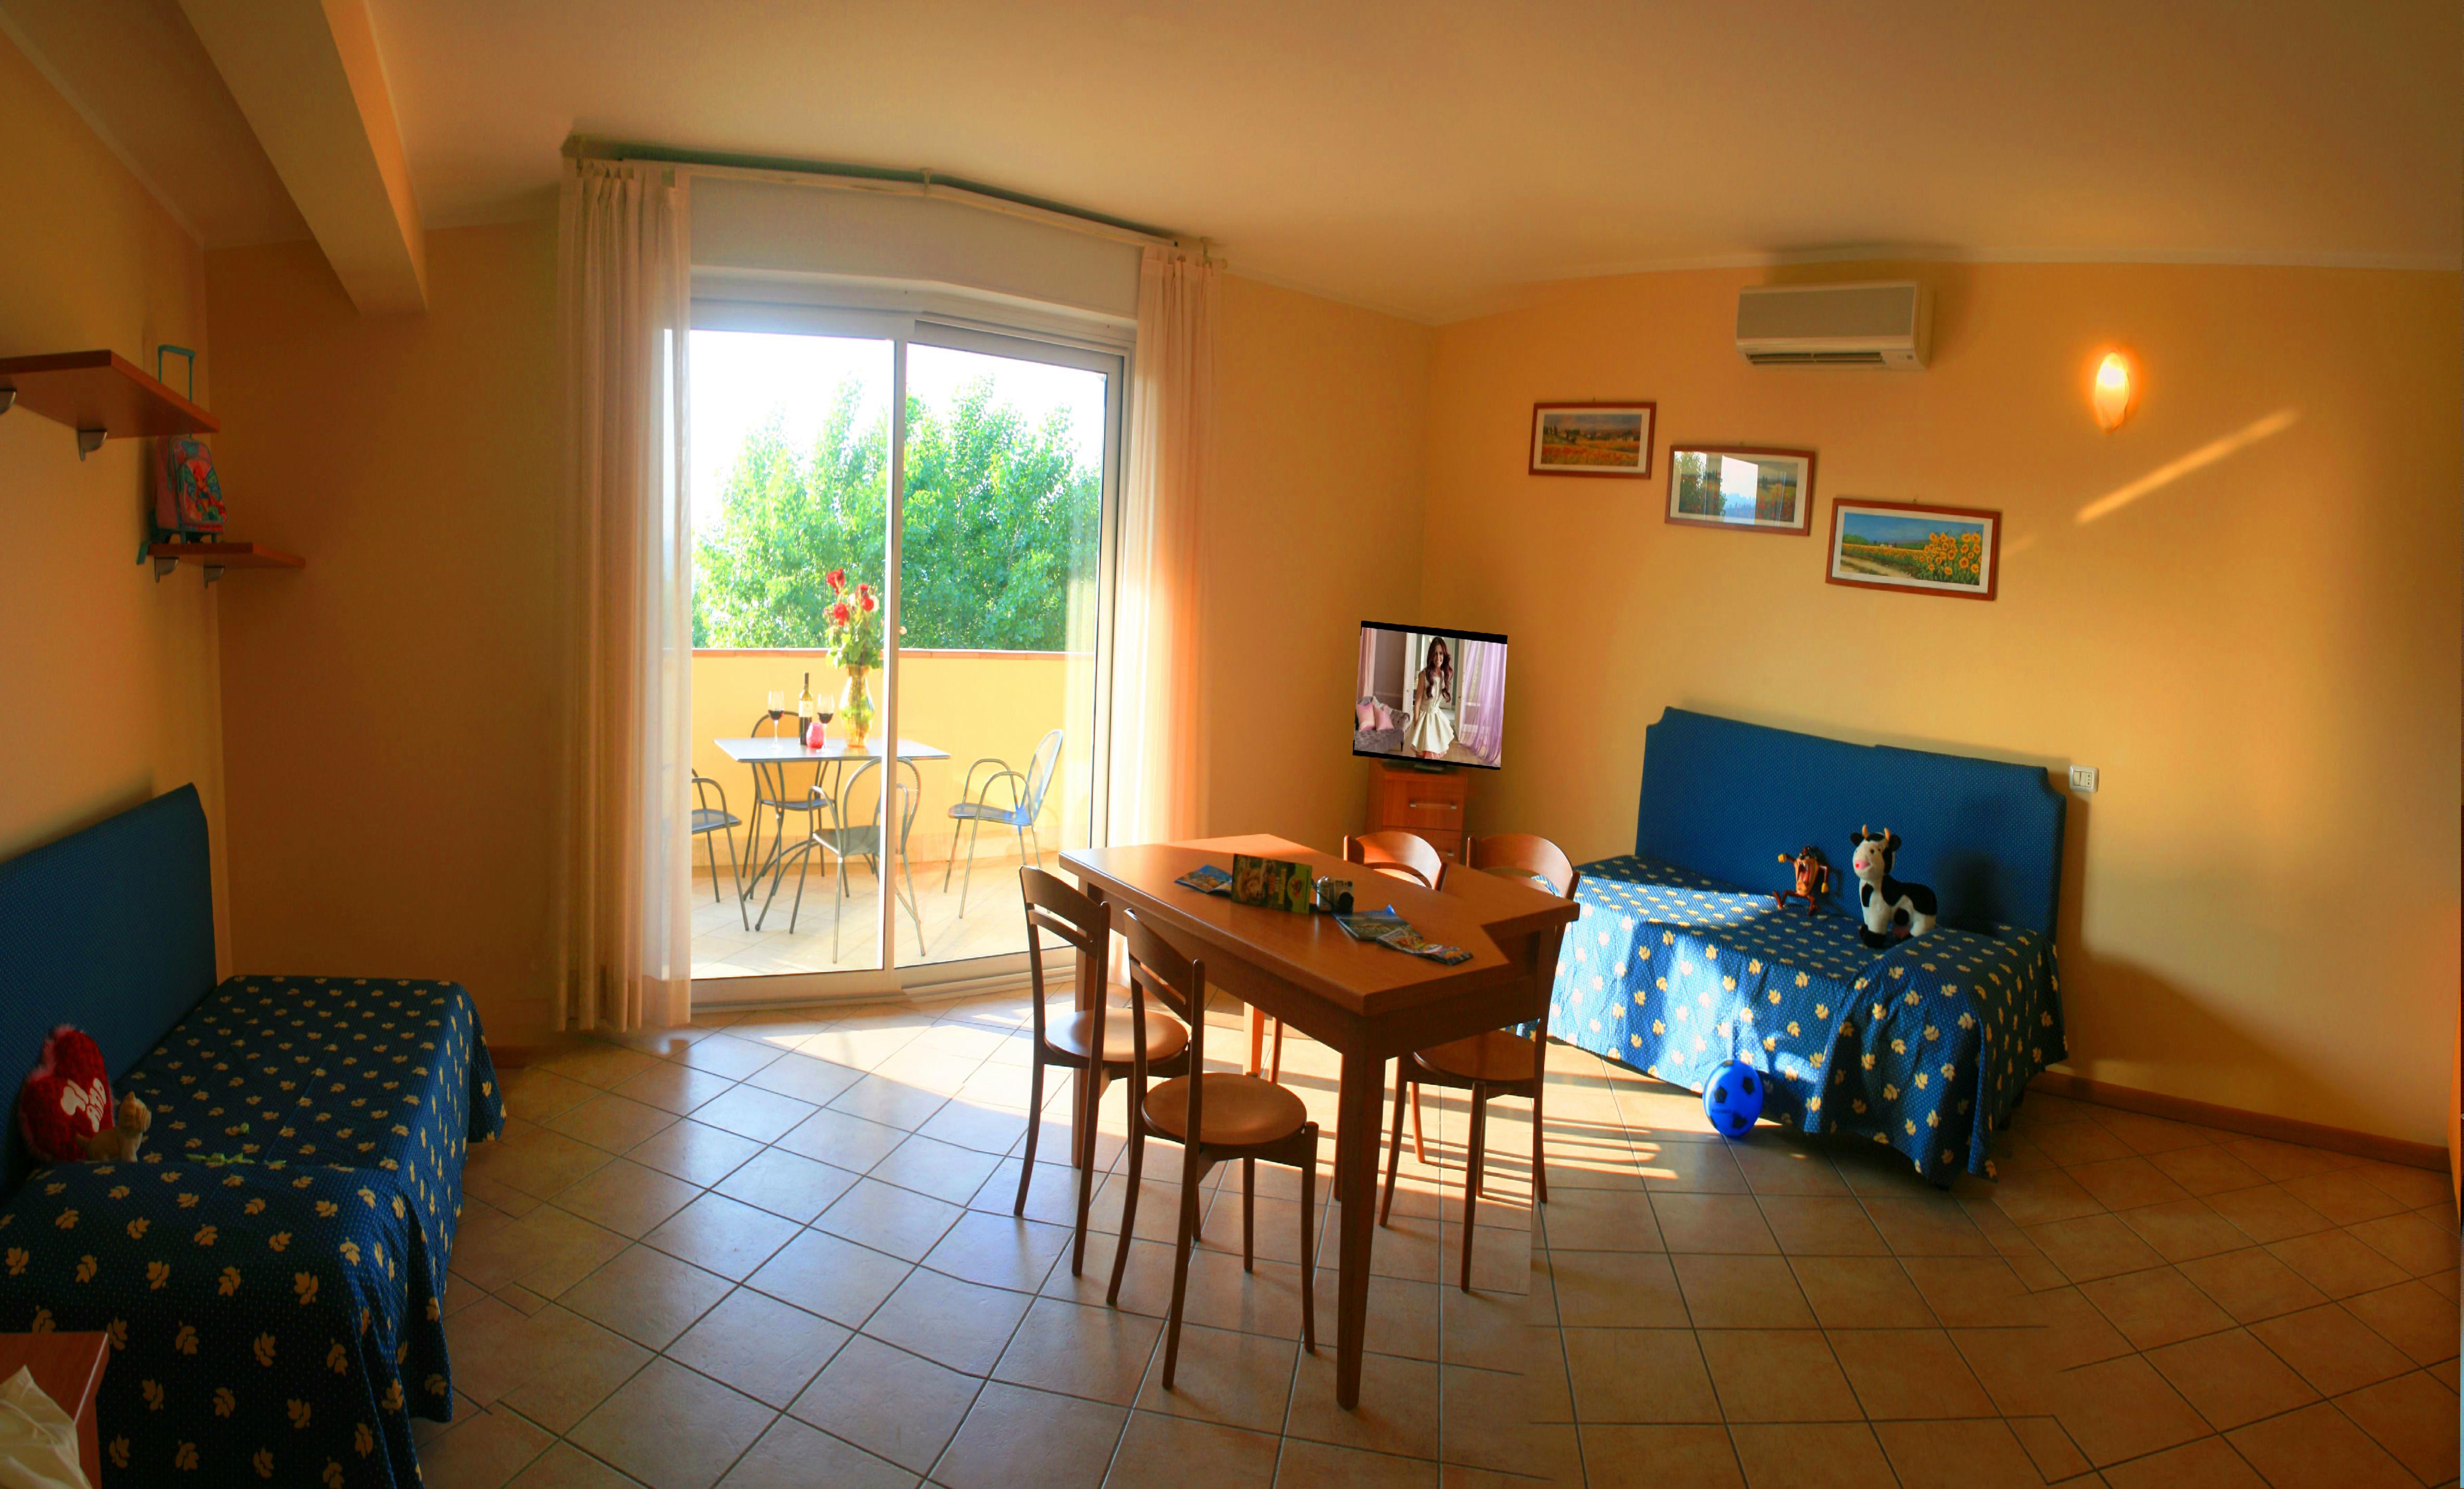 Big Family Rooms in Manerba A holiday near the Gulf of Garda where you can save money without sacrificing luxury